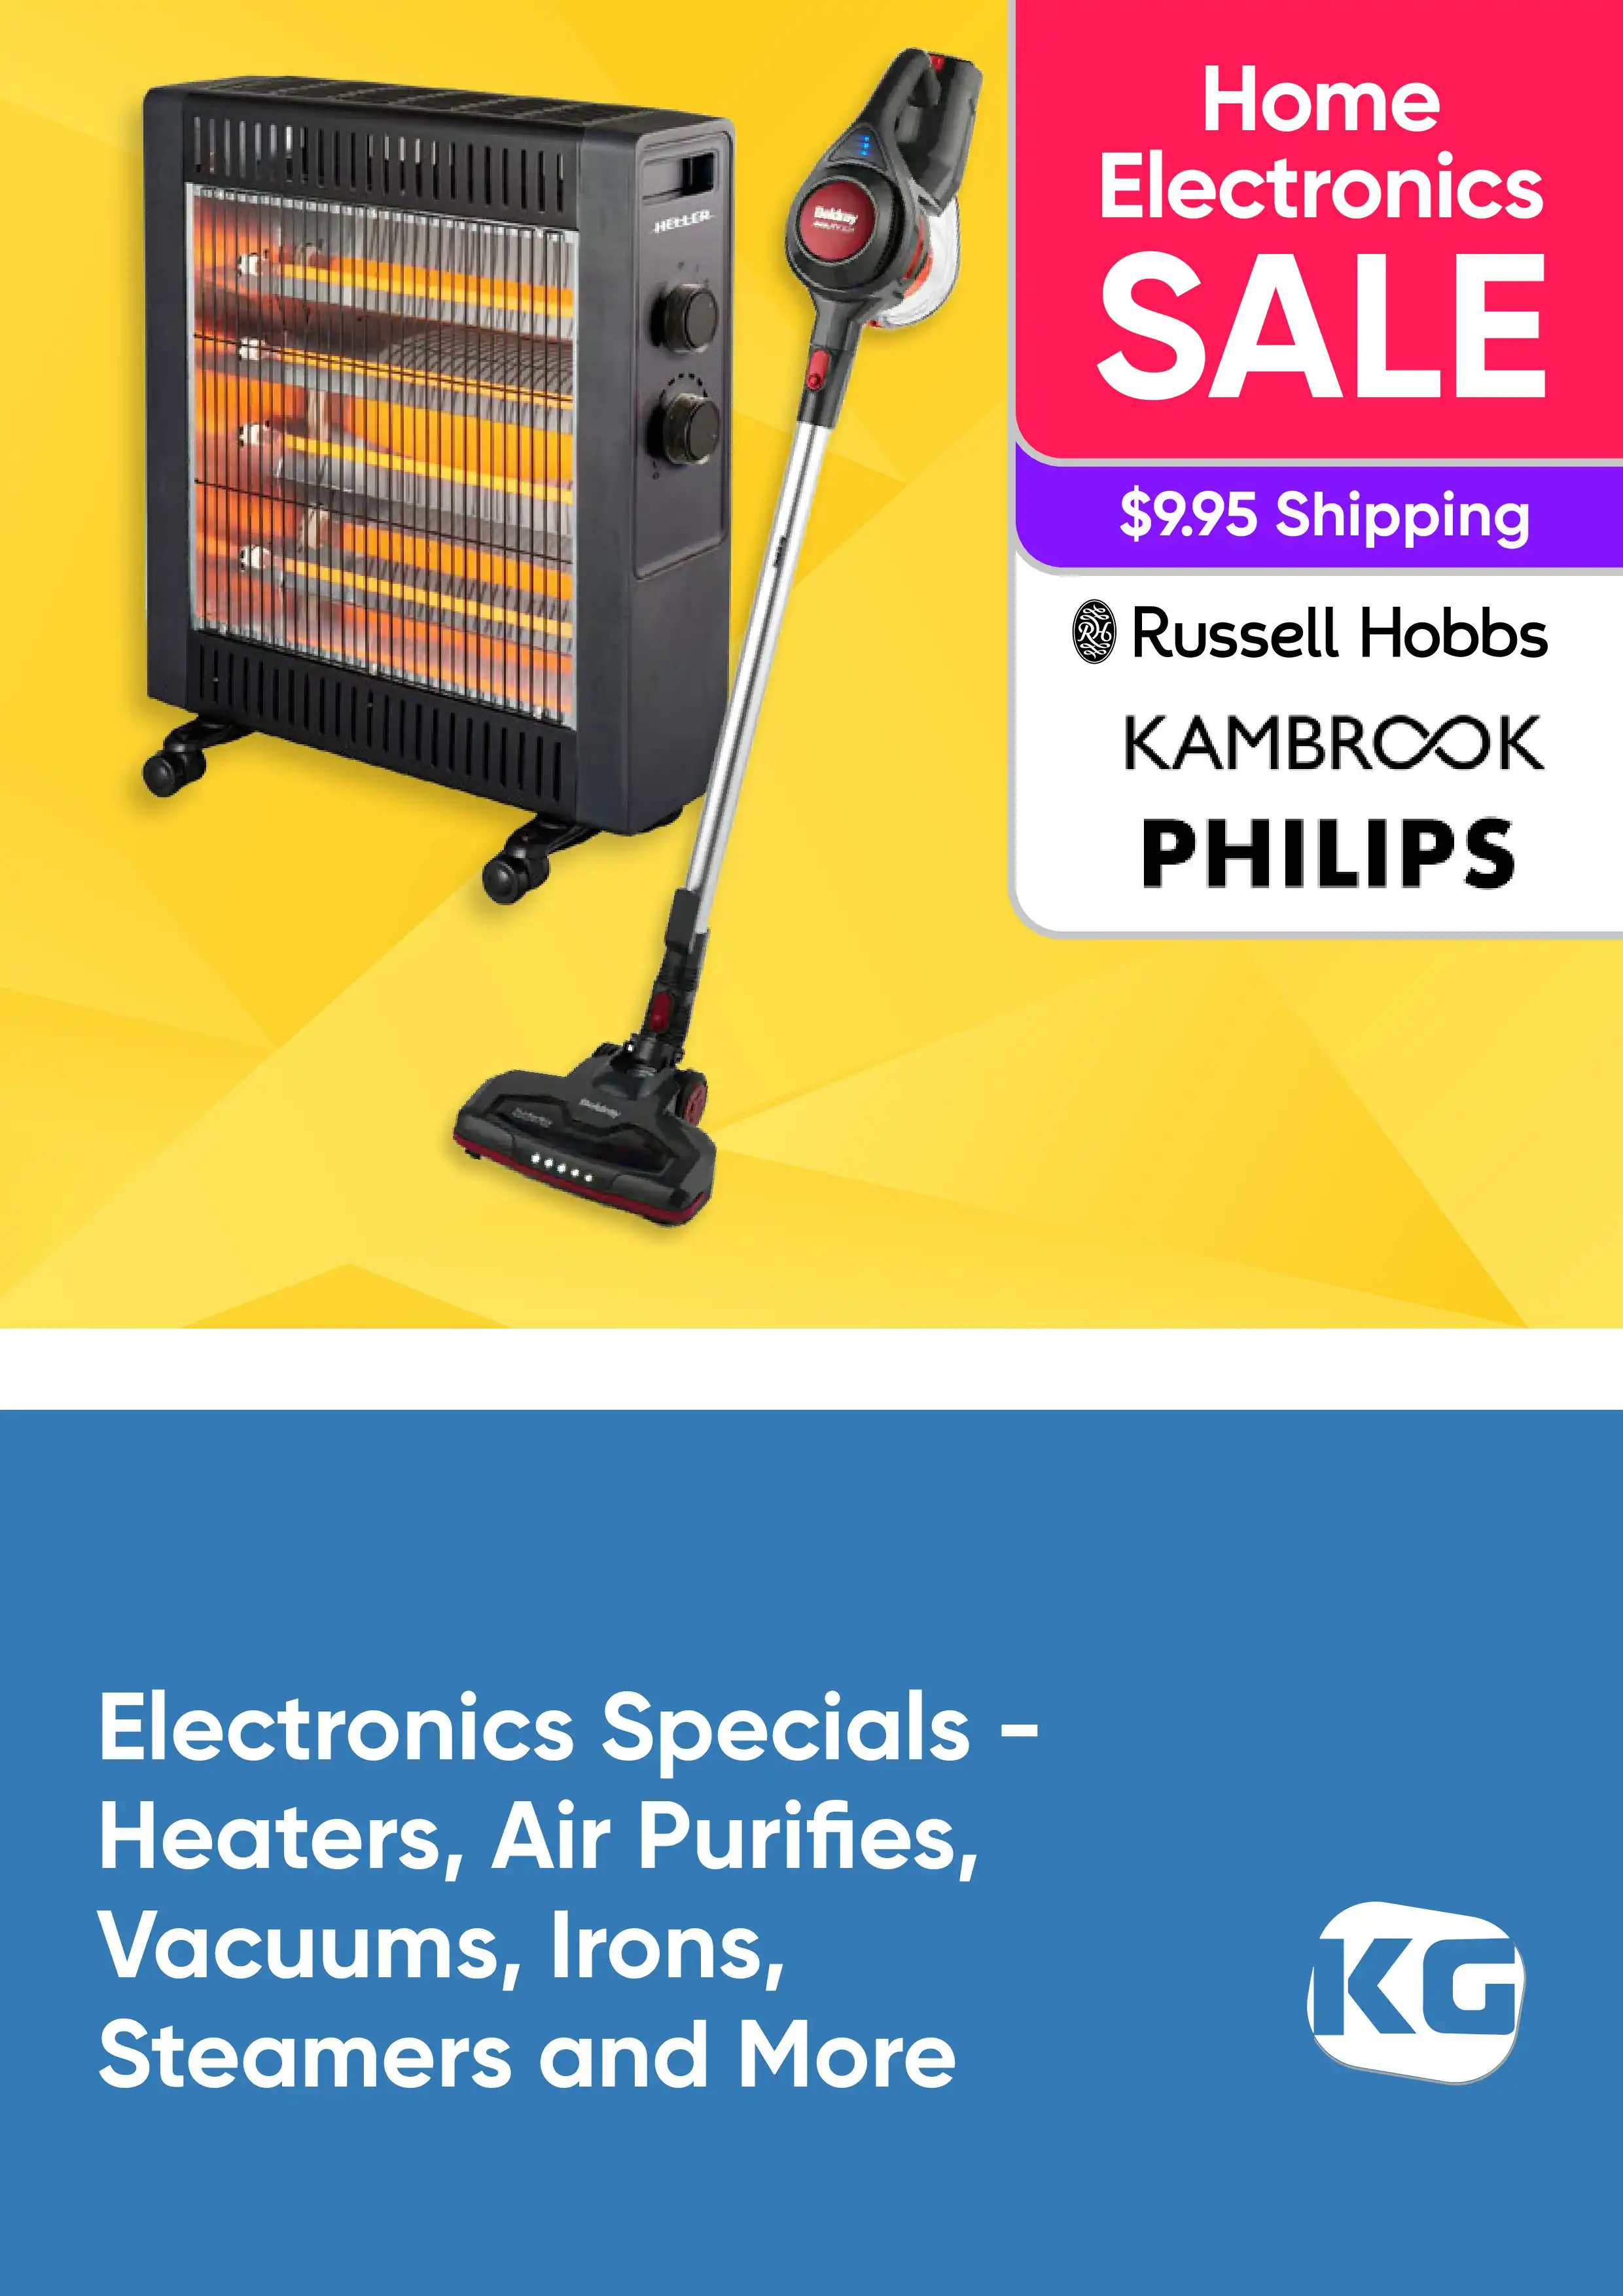 Electronics Specials - Heaters, Air Purifies, Vacuums, Irons, Steamers and More